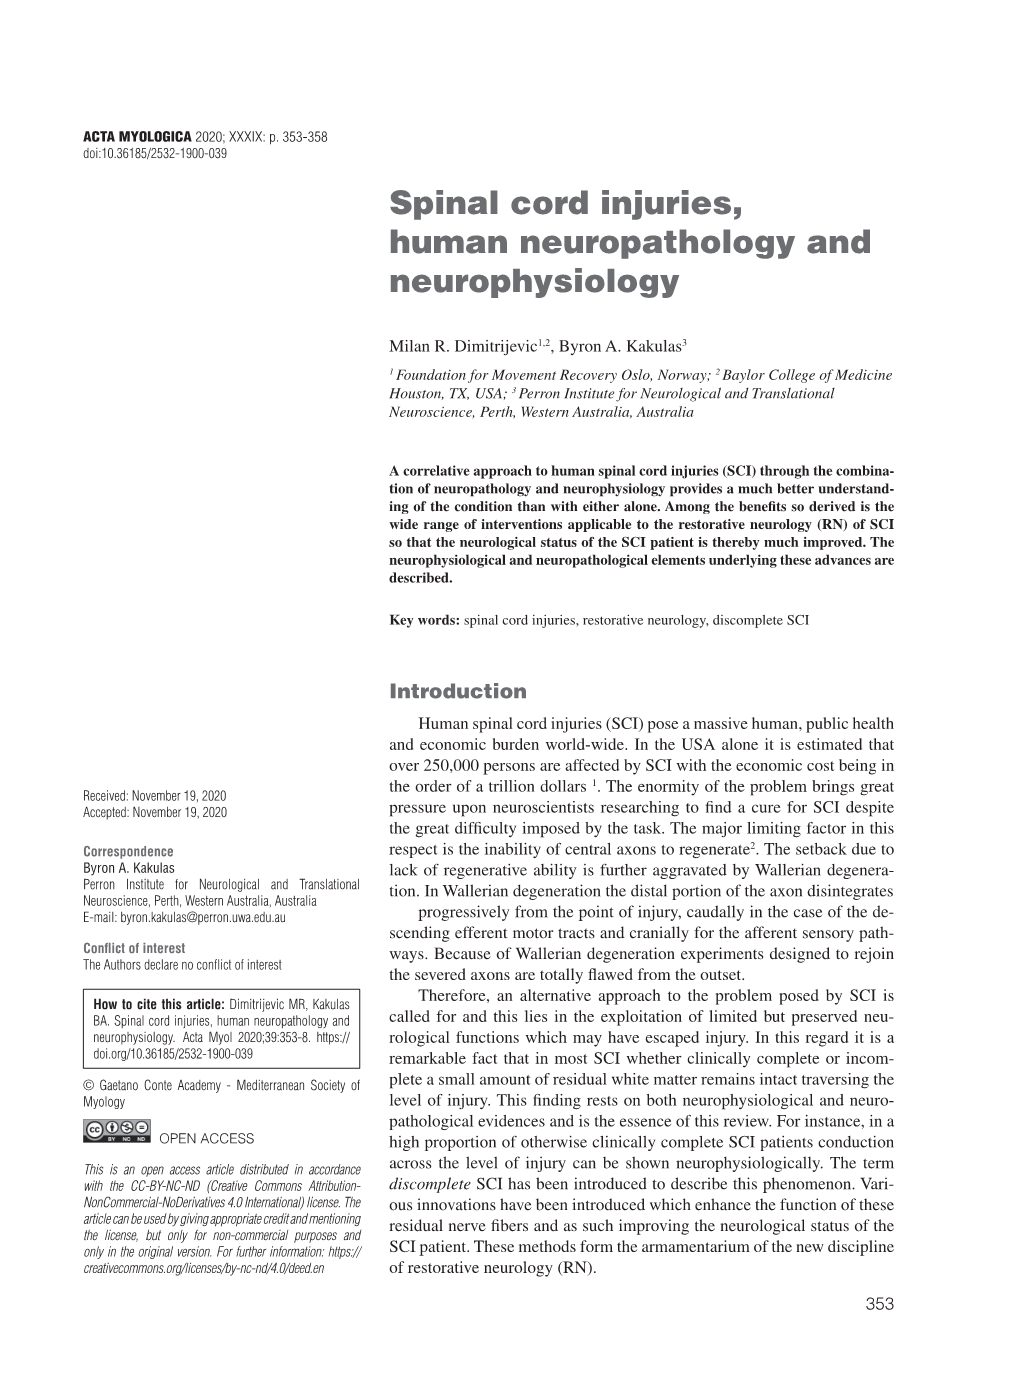 Spinal Cord Injuries, Human Neuropathology and Neurophysiology